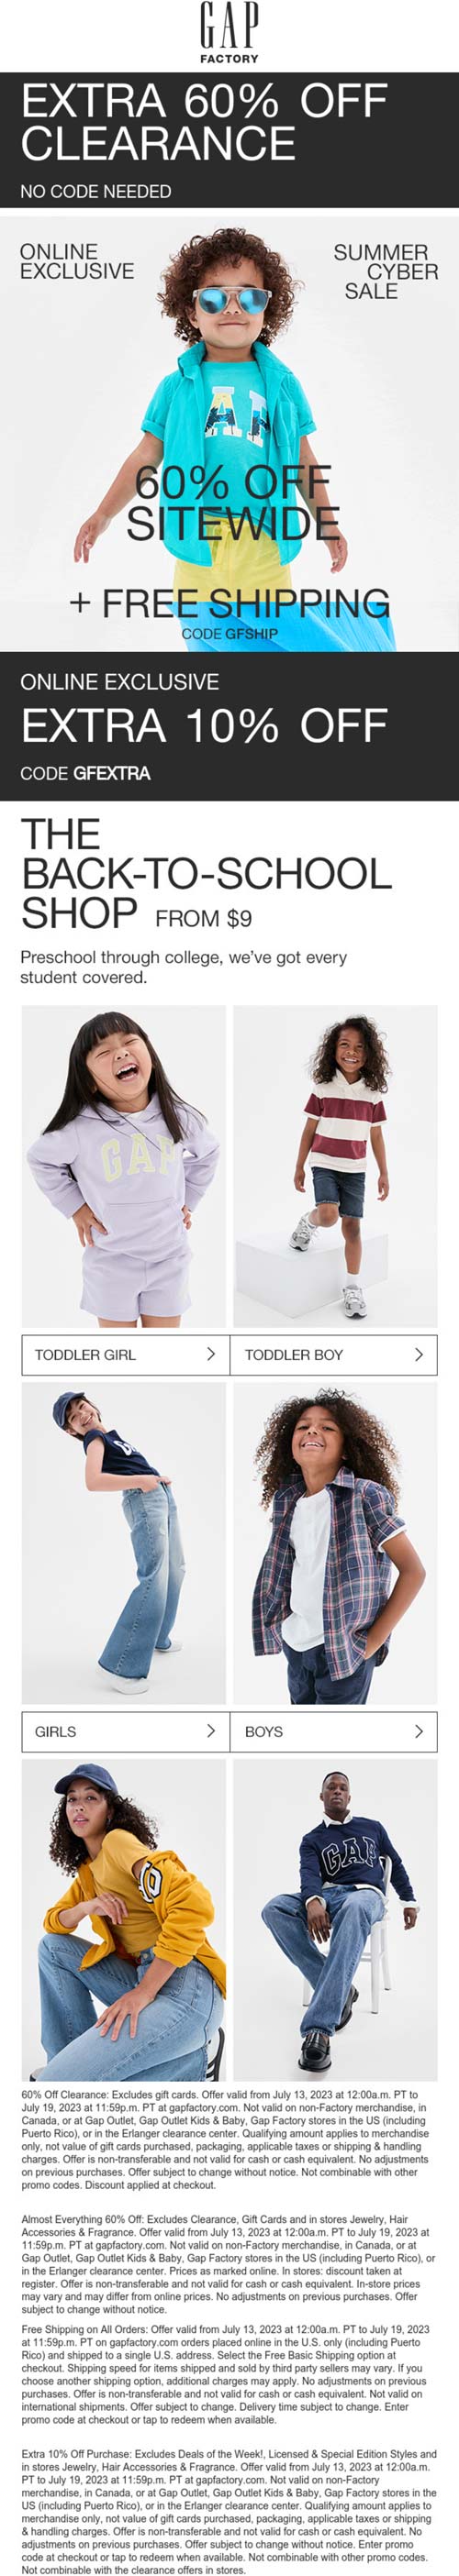 Gap Factory stores Coupon  Extra 60% off clearance & more online at Gap Factory #gapfactory 